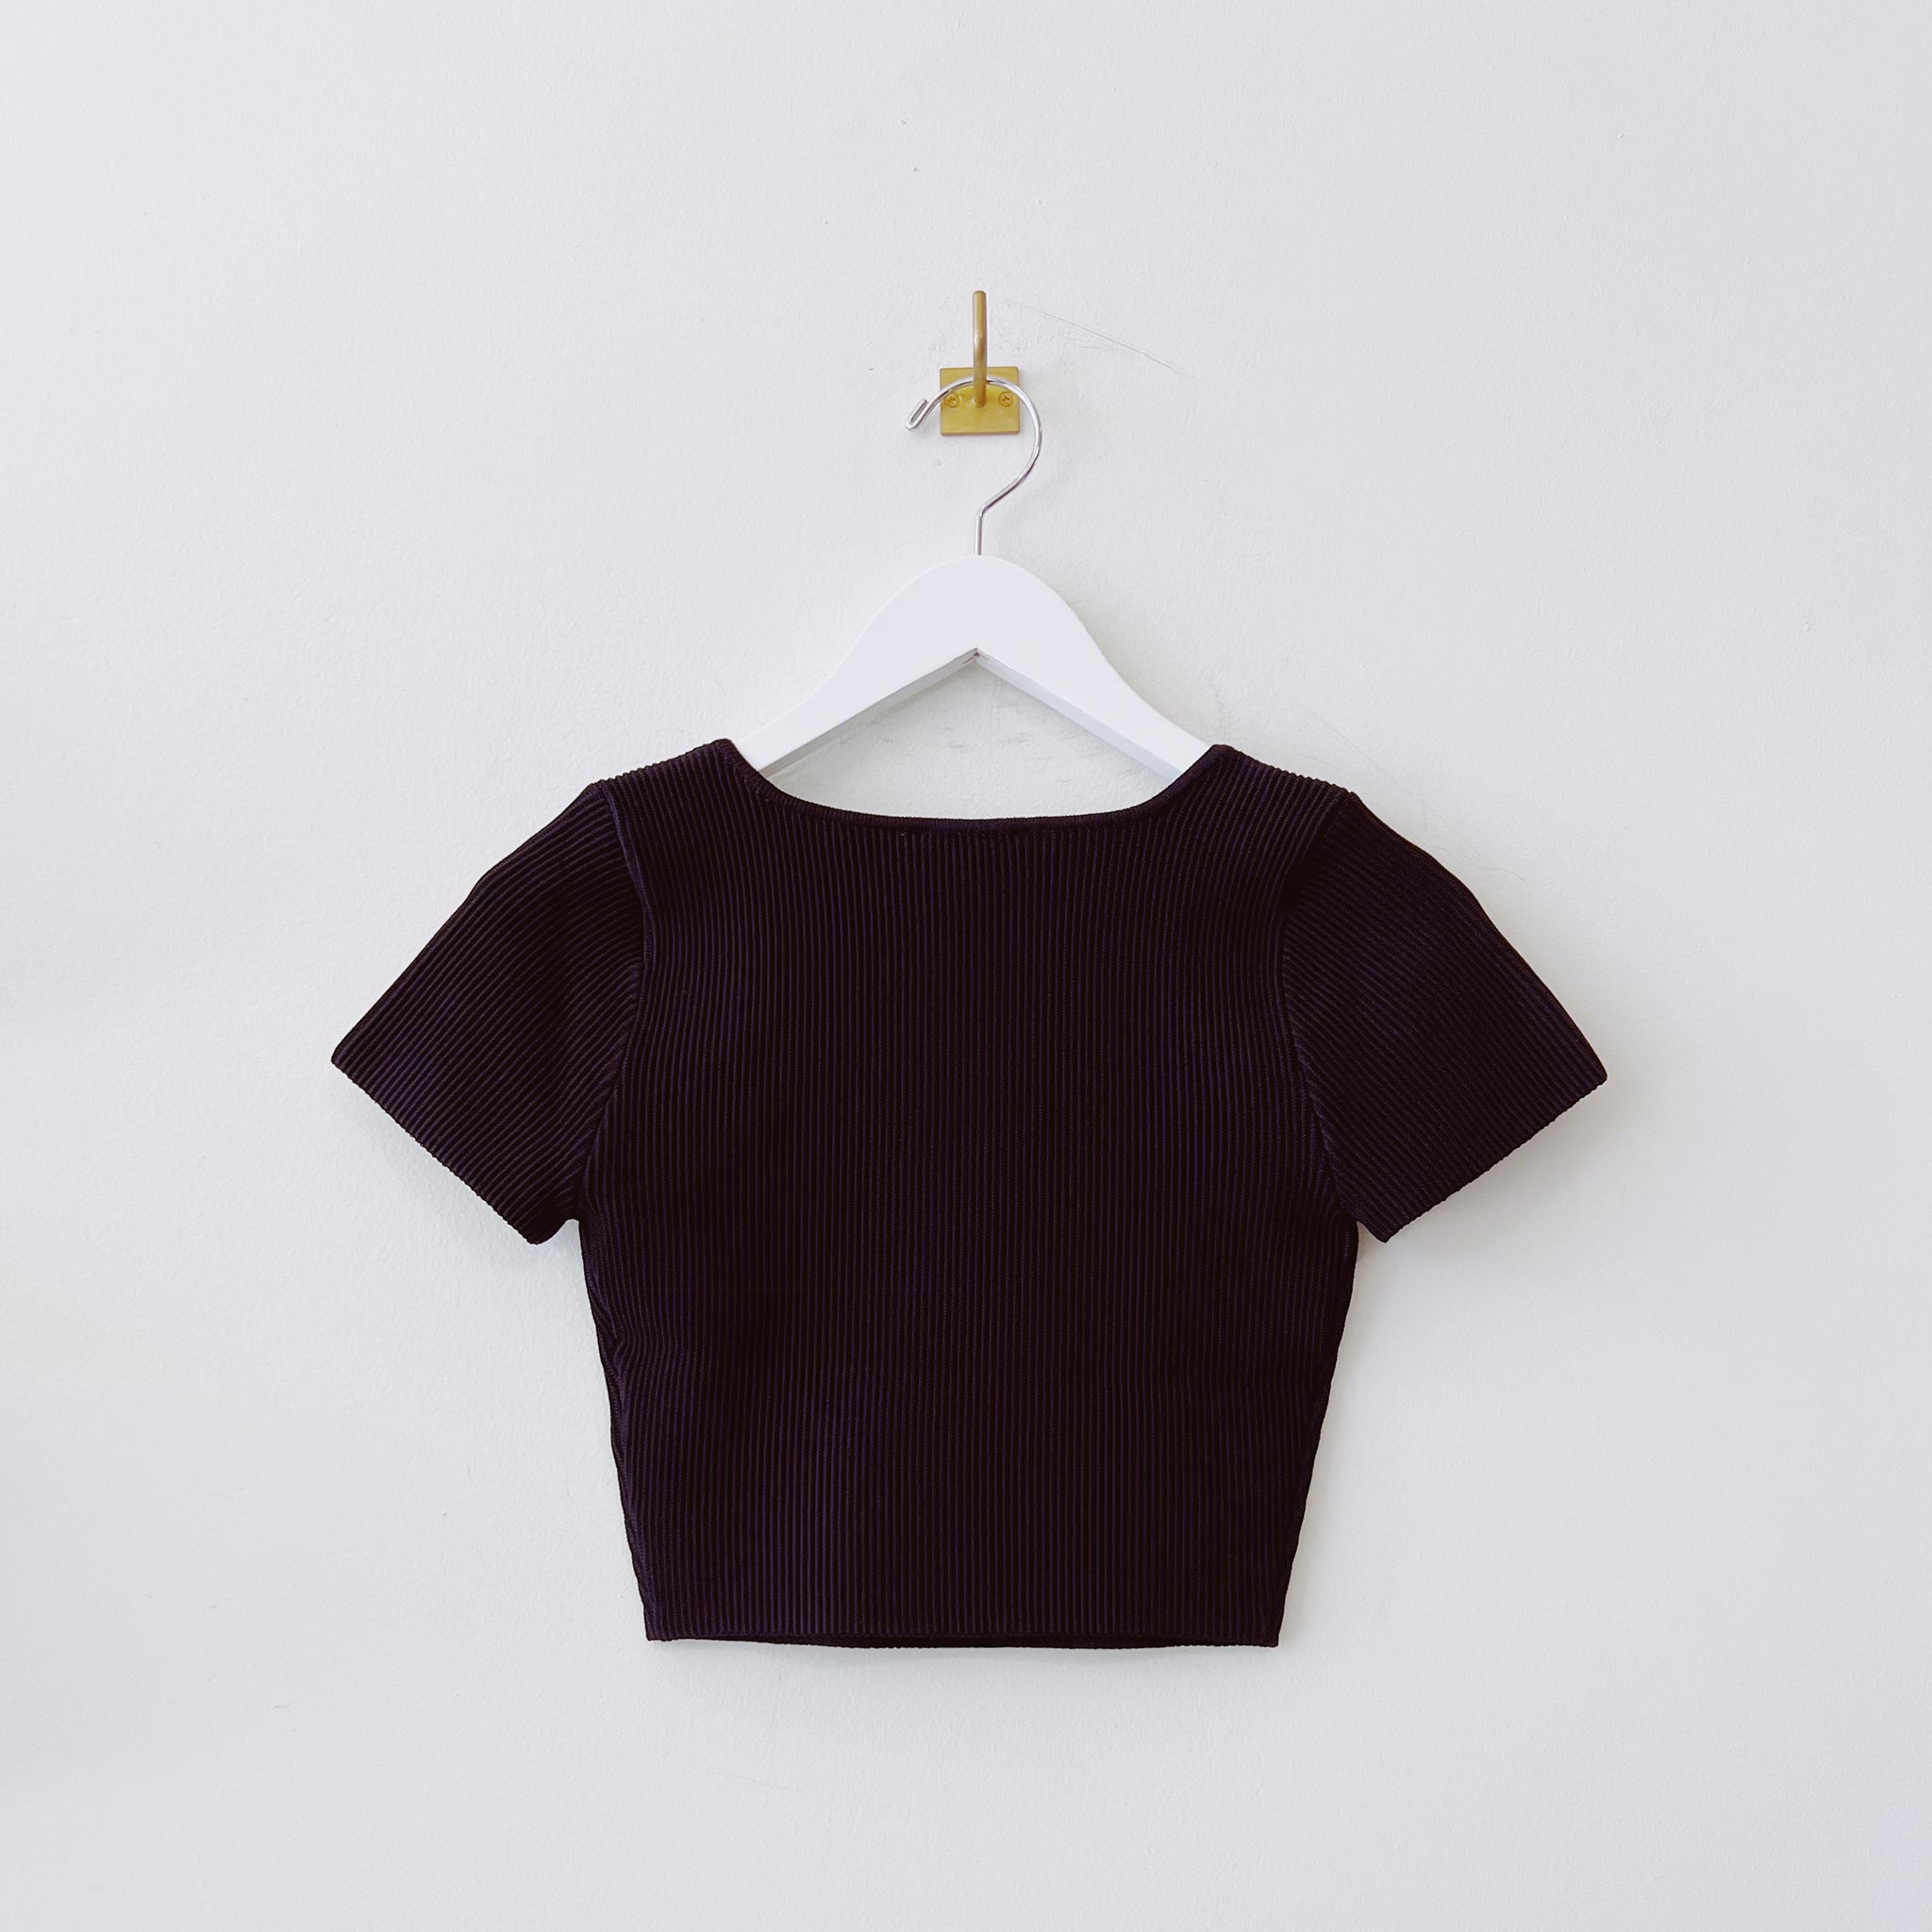 Back hanging photo of the Square Neck Crop Tee - Black.